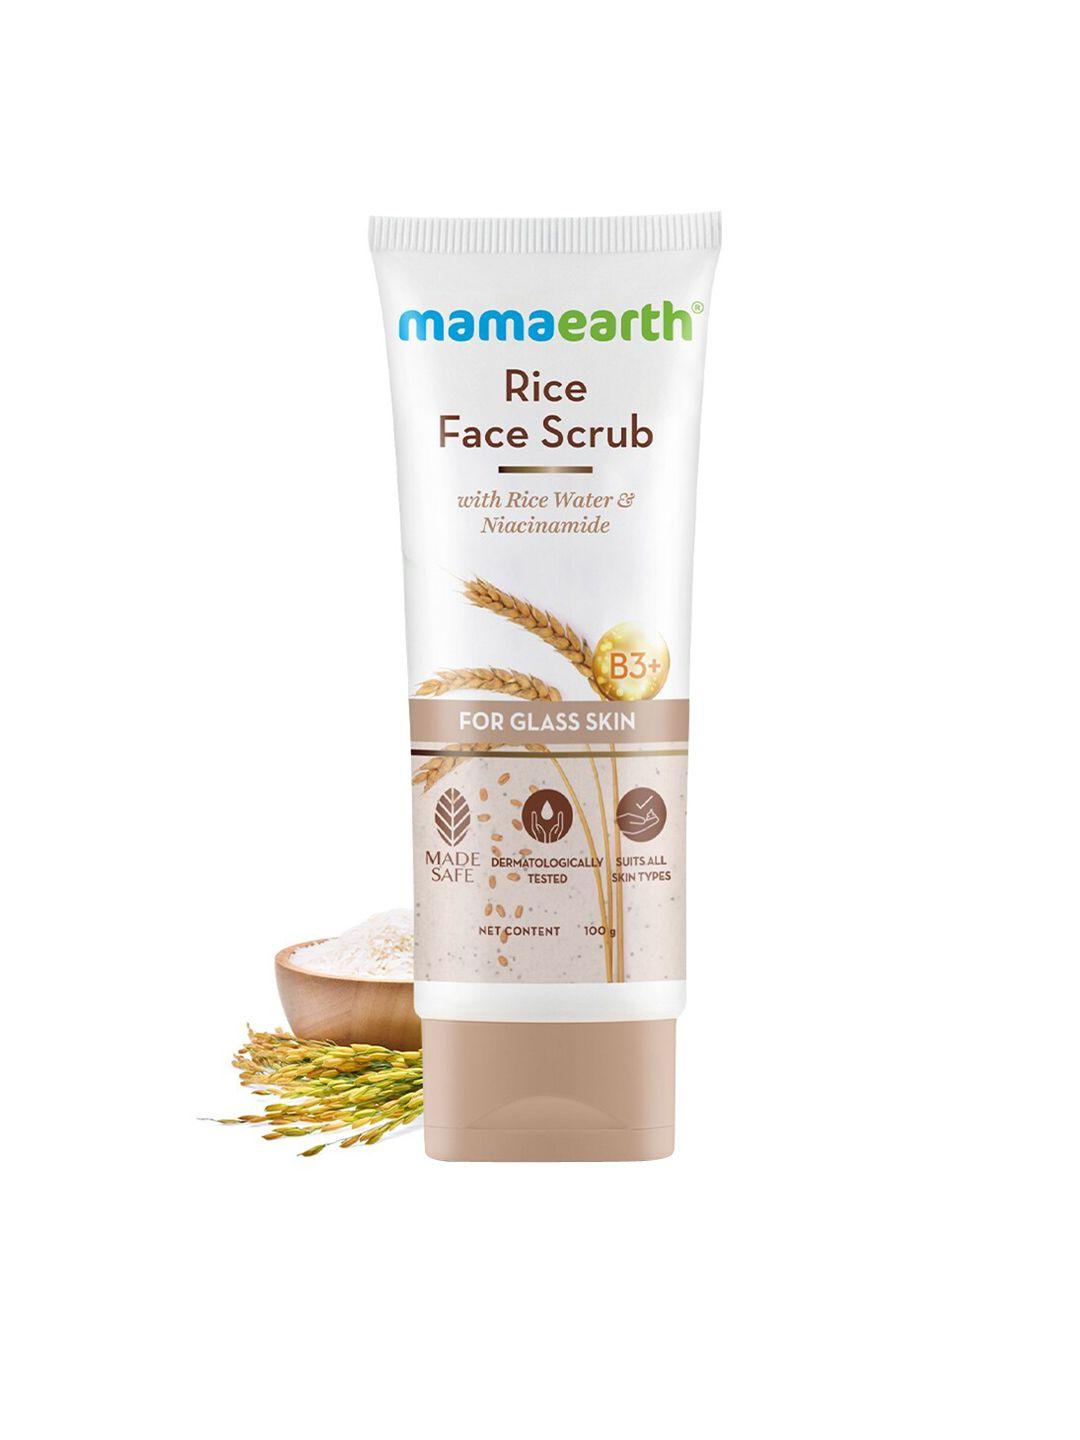 mamaearth rice face scrub with rice water & niacinamide for glass skin - 100g